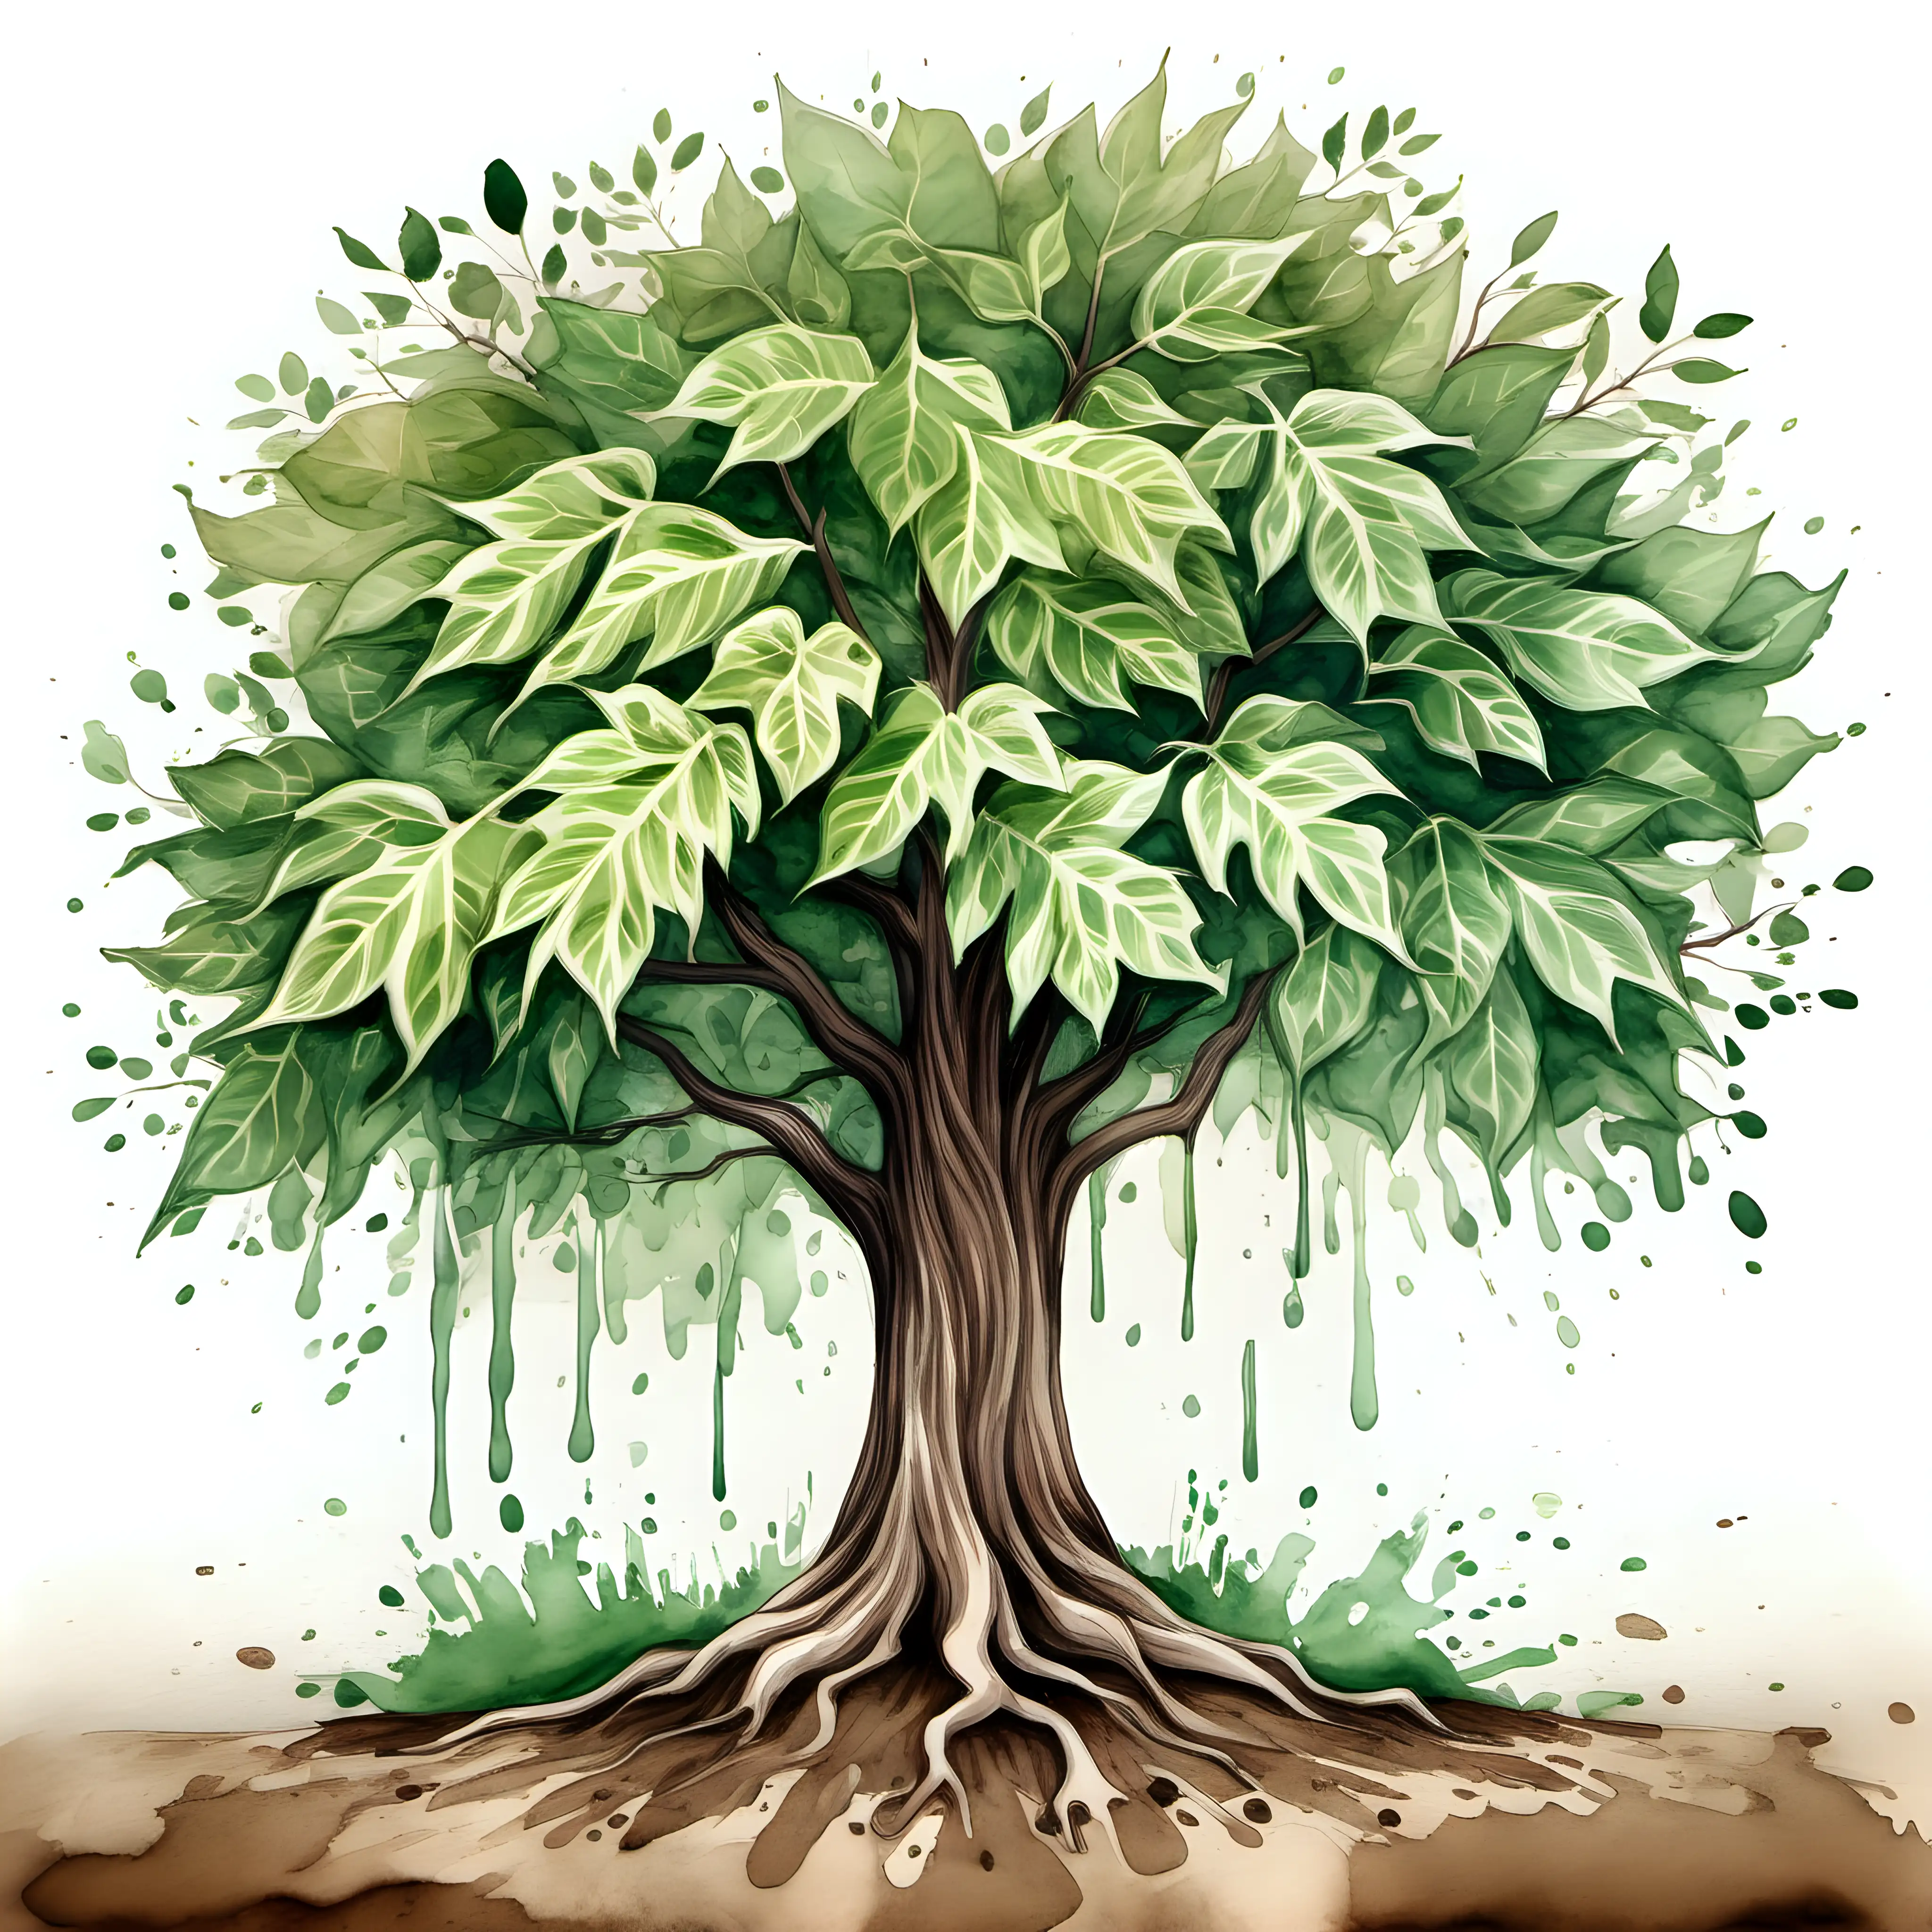 an image of watercolored tree with green heavy leaves on,  brown ground,beautiful art